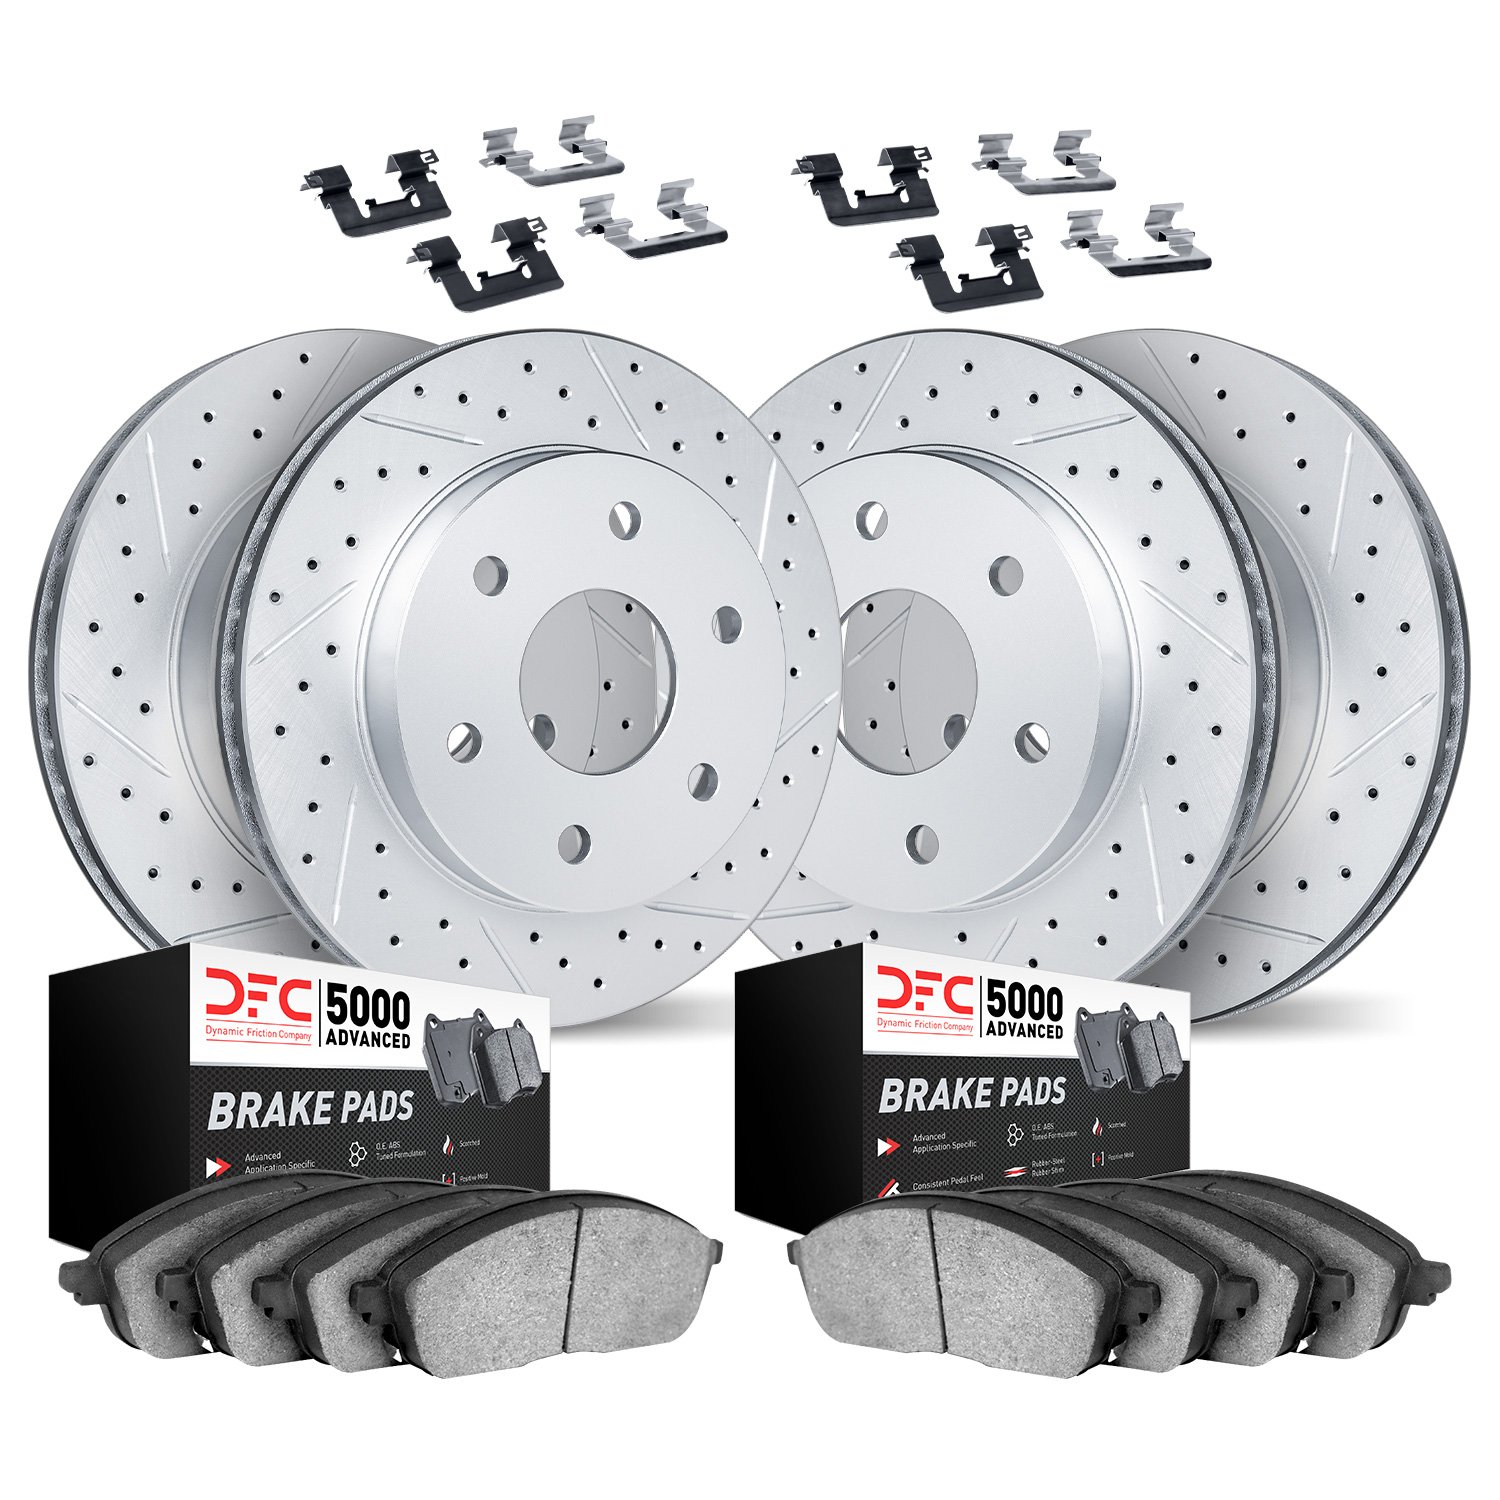 2514-47305 Geoperformance Drilled/Slotted Rotors w/5000 Advanced Brake Pads Kit & Hardware, Fits Select GM, Position: Front and